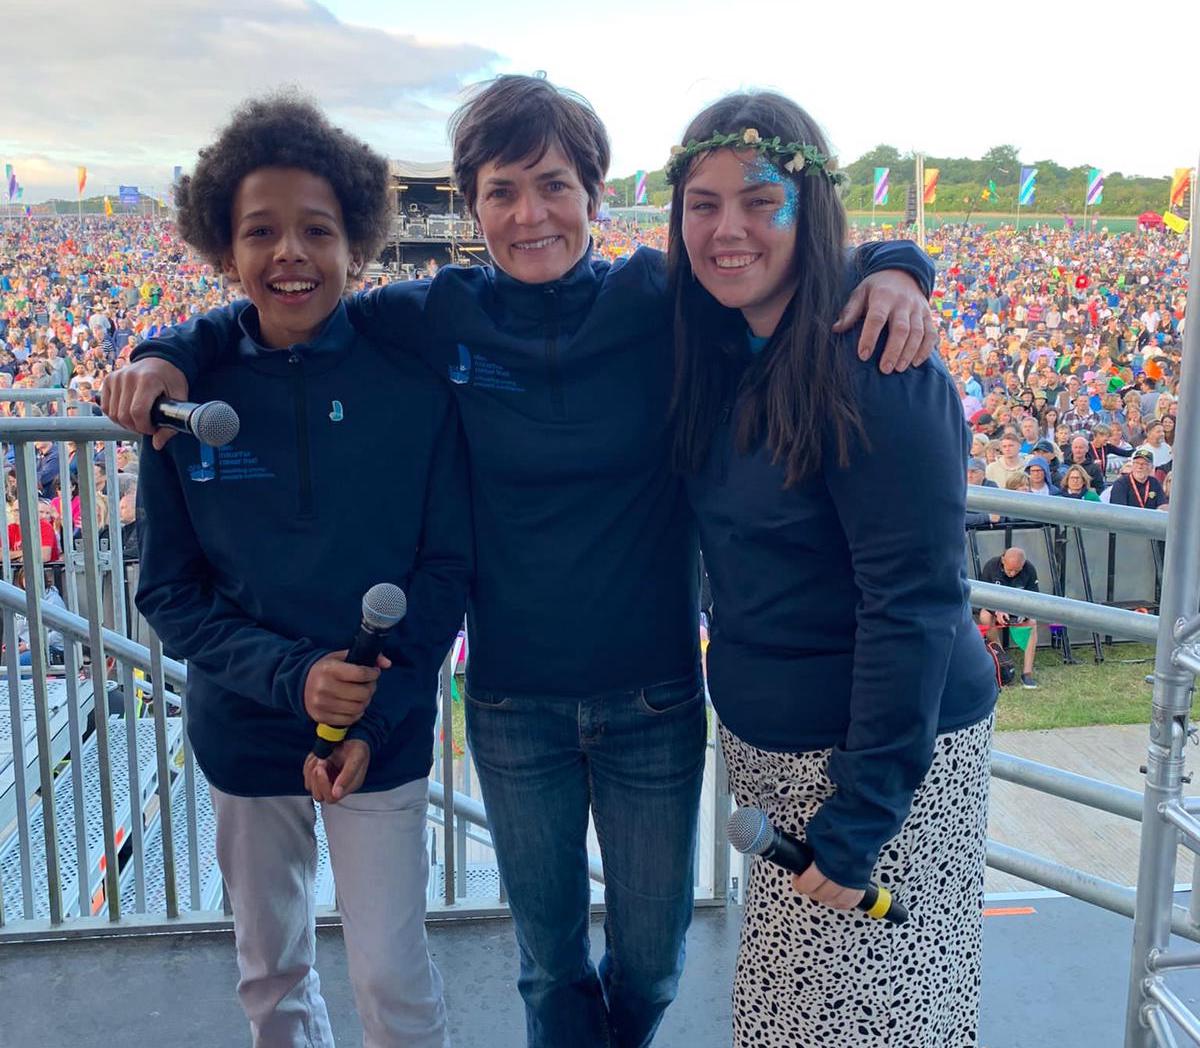 Ellen MacArthur with young person Emmanuel and volunteer Macy at 2021 CarFest South